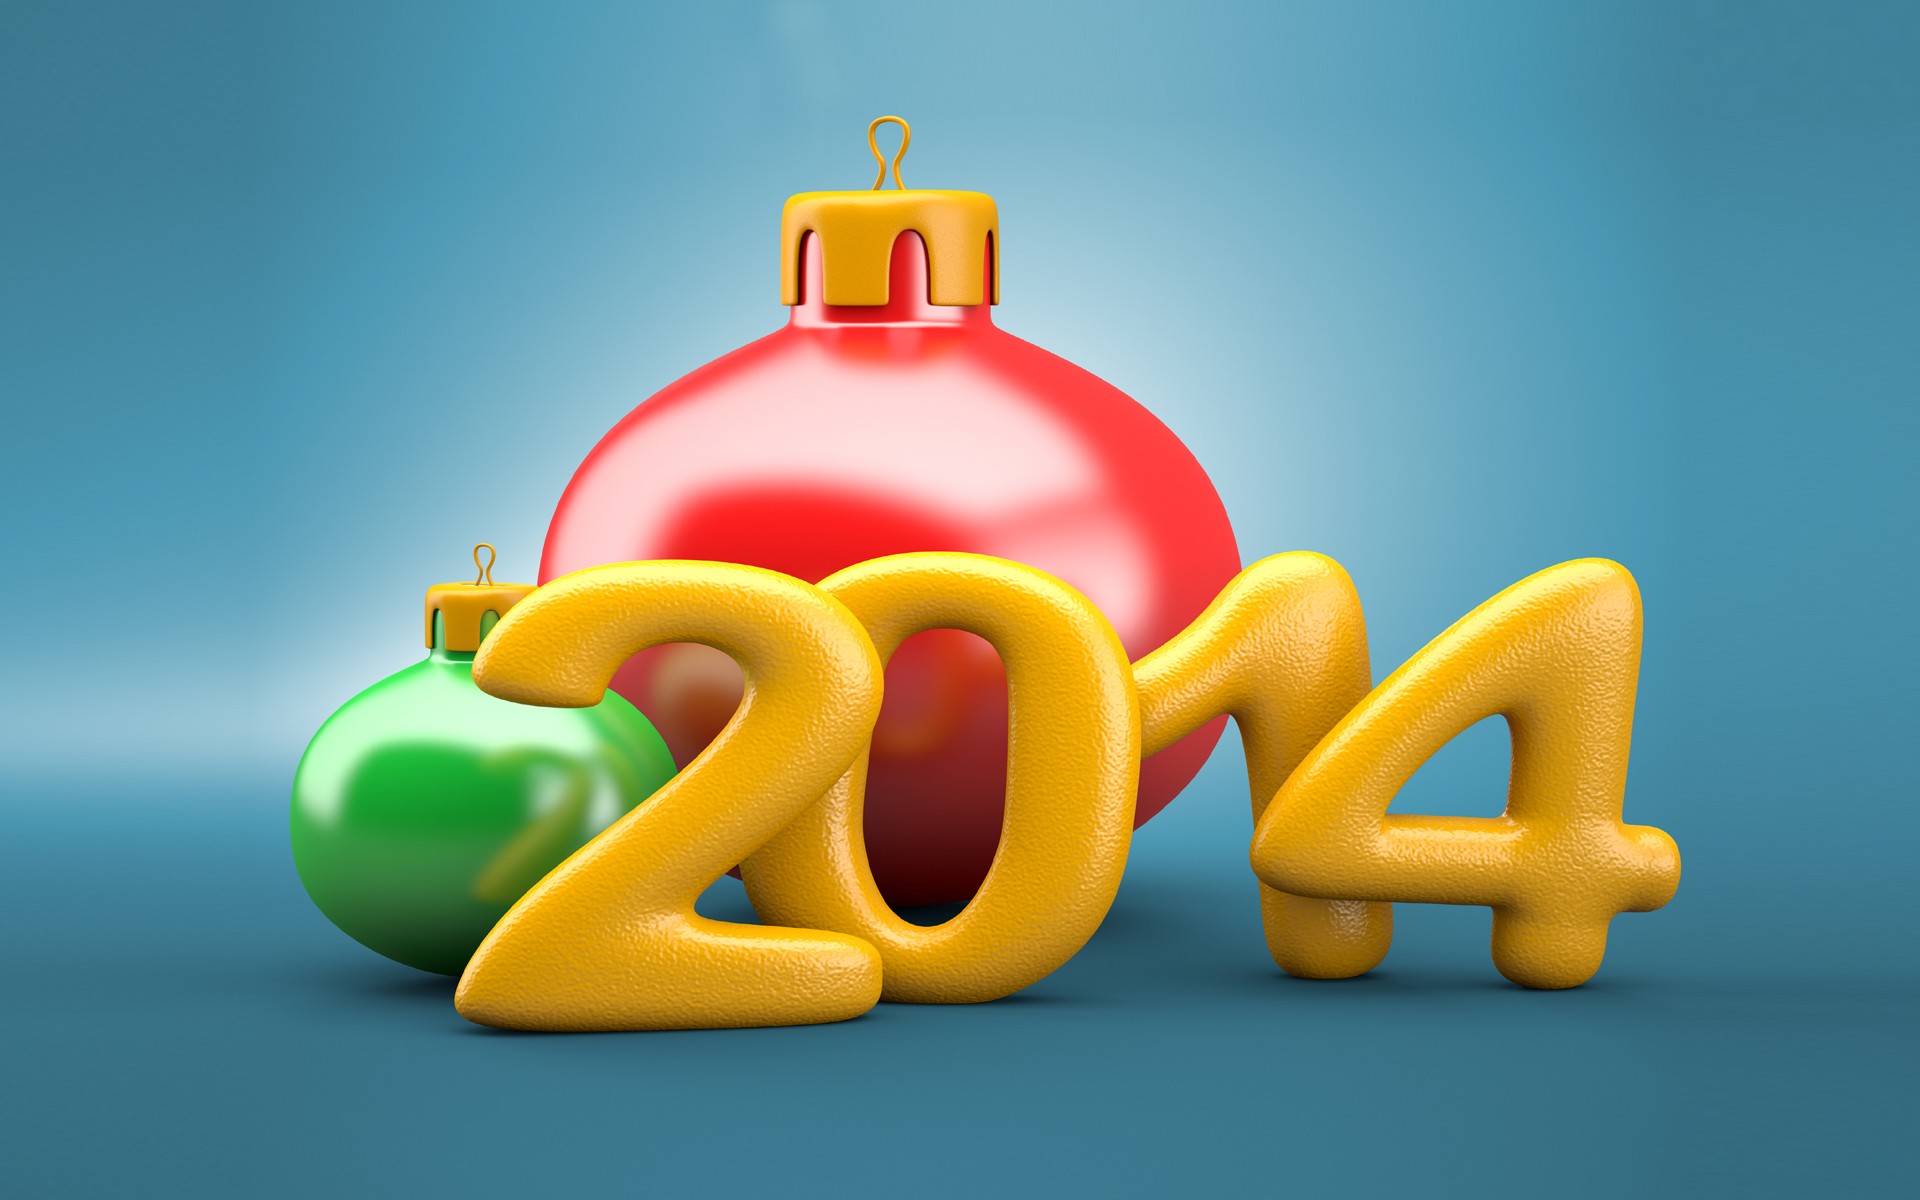 Holiday New Year 2014 HD Wallpaper | Background Image